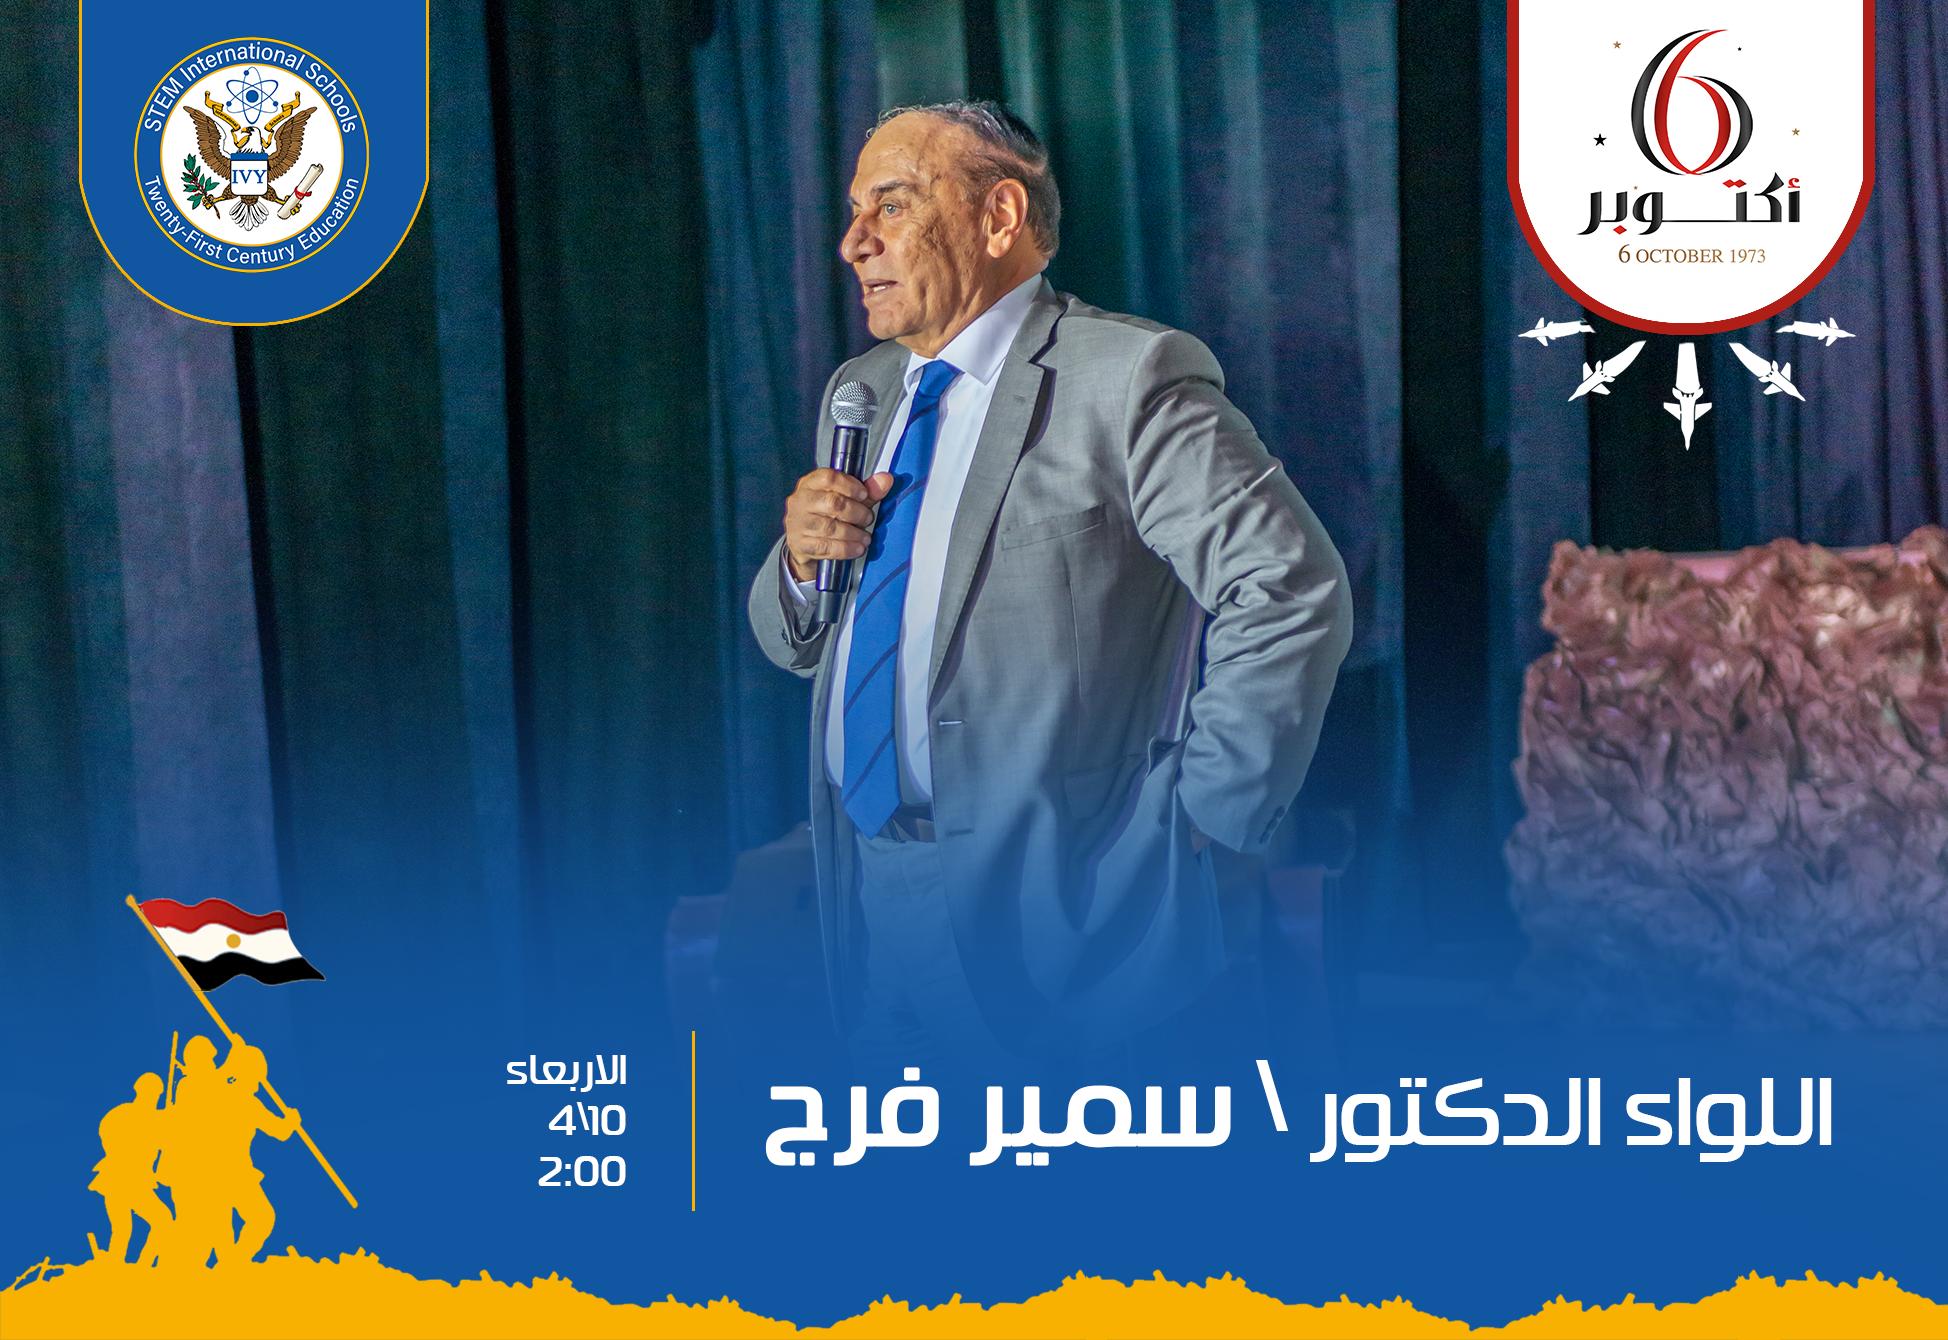 Promotional graphic for an educational event featuring Dr. Samir Farag at IVY STEM International School. Includes emblem, text, and Arabic details.